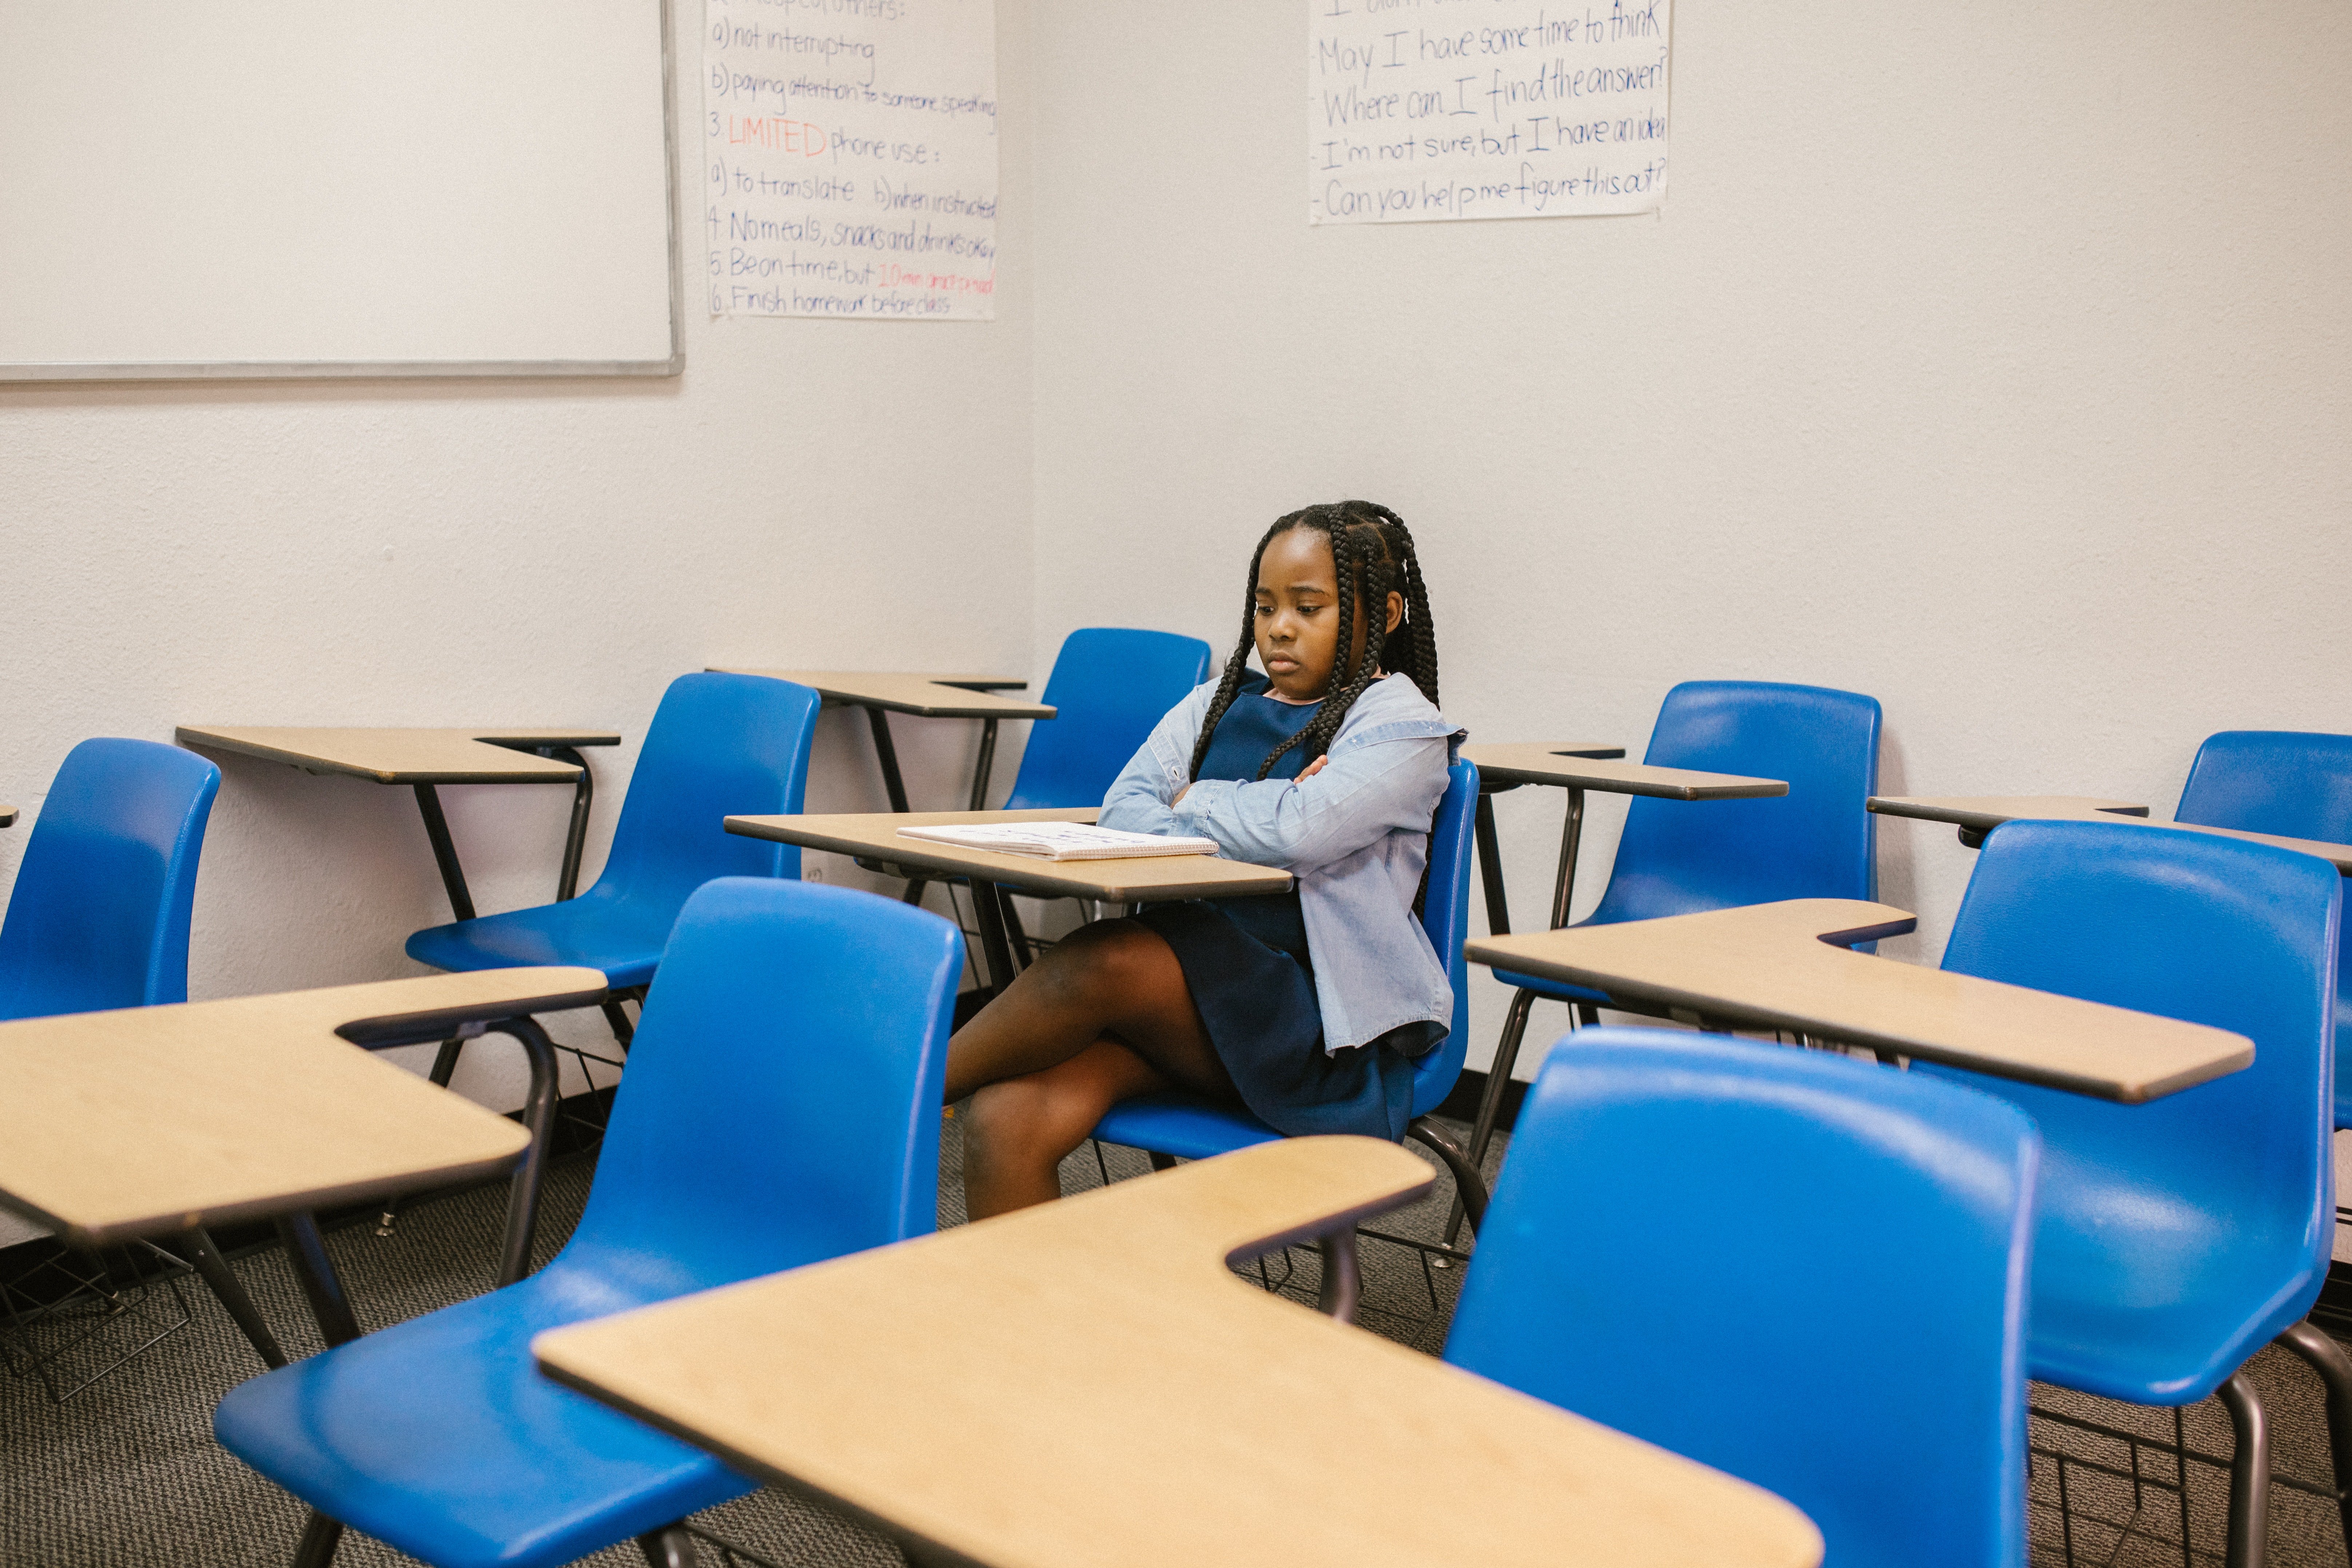 The student sat on her seat, looking gloomy. | Photo: Pexels/RODNAE Productions